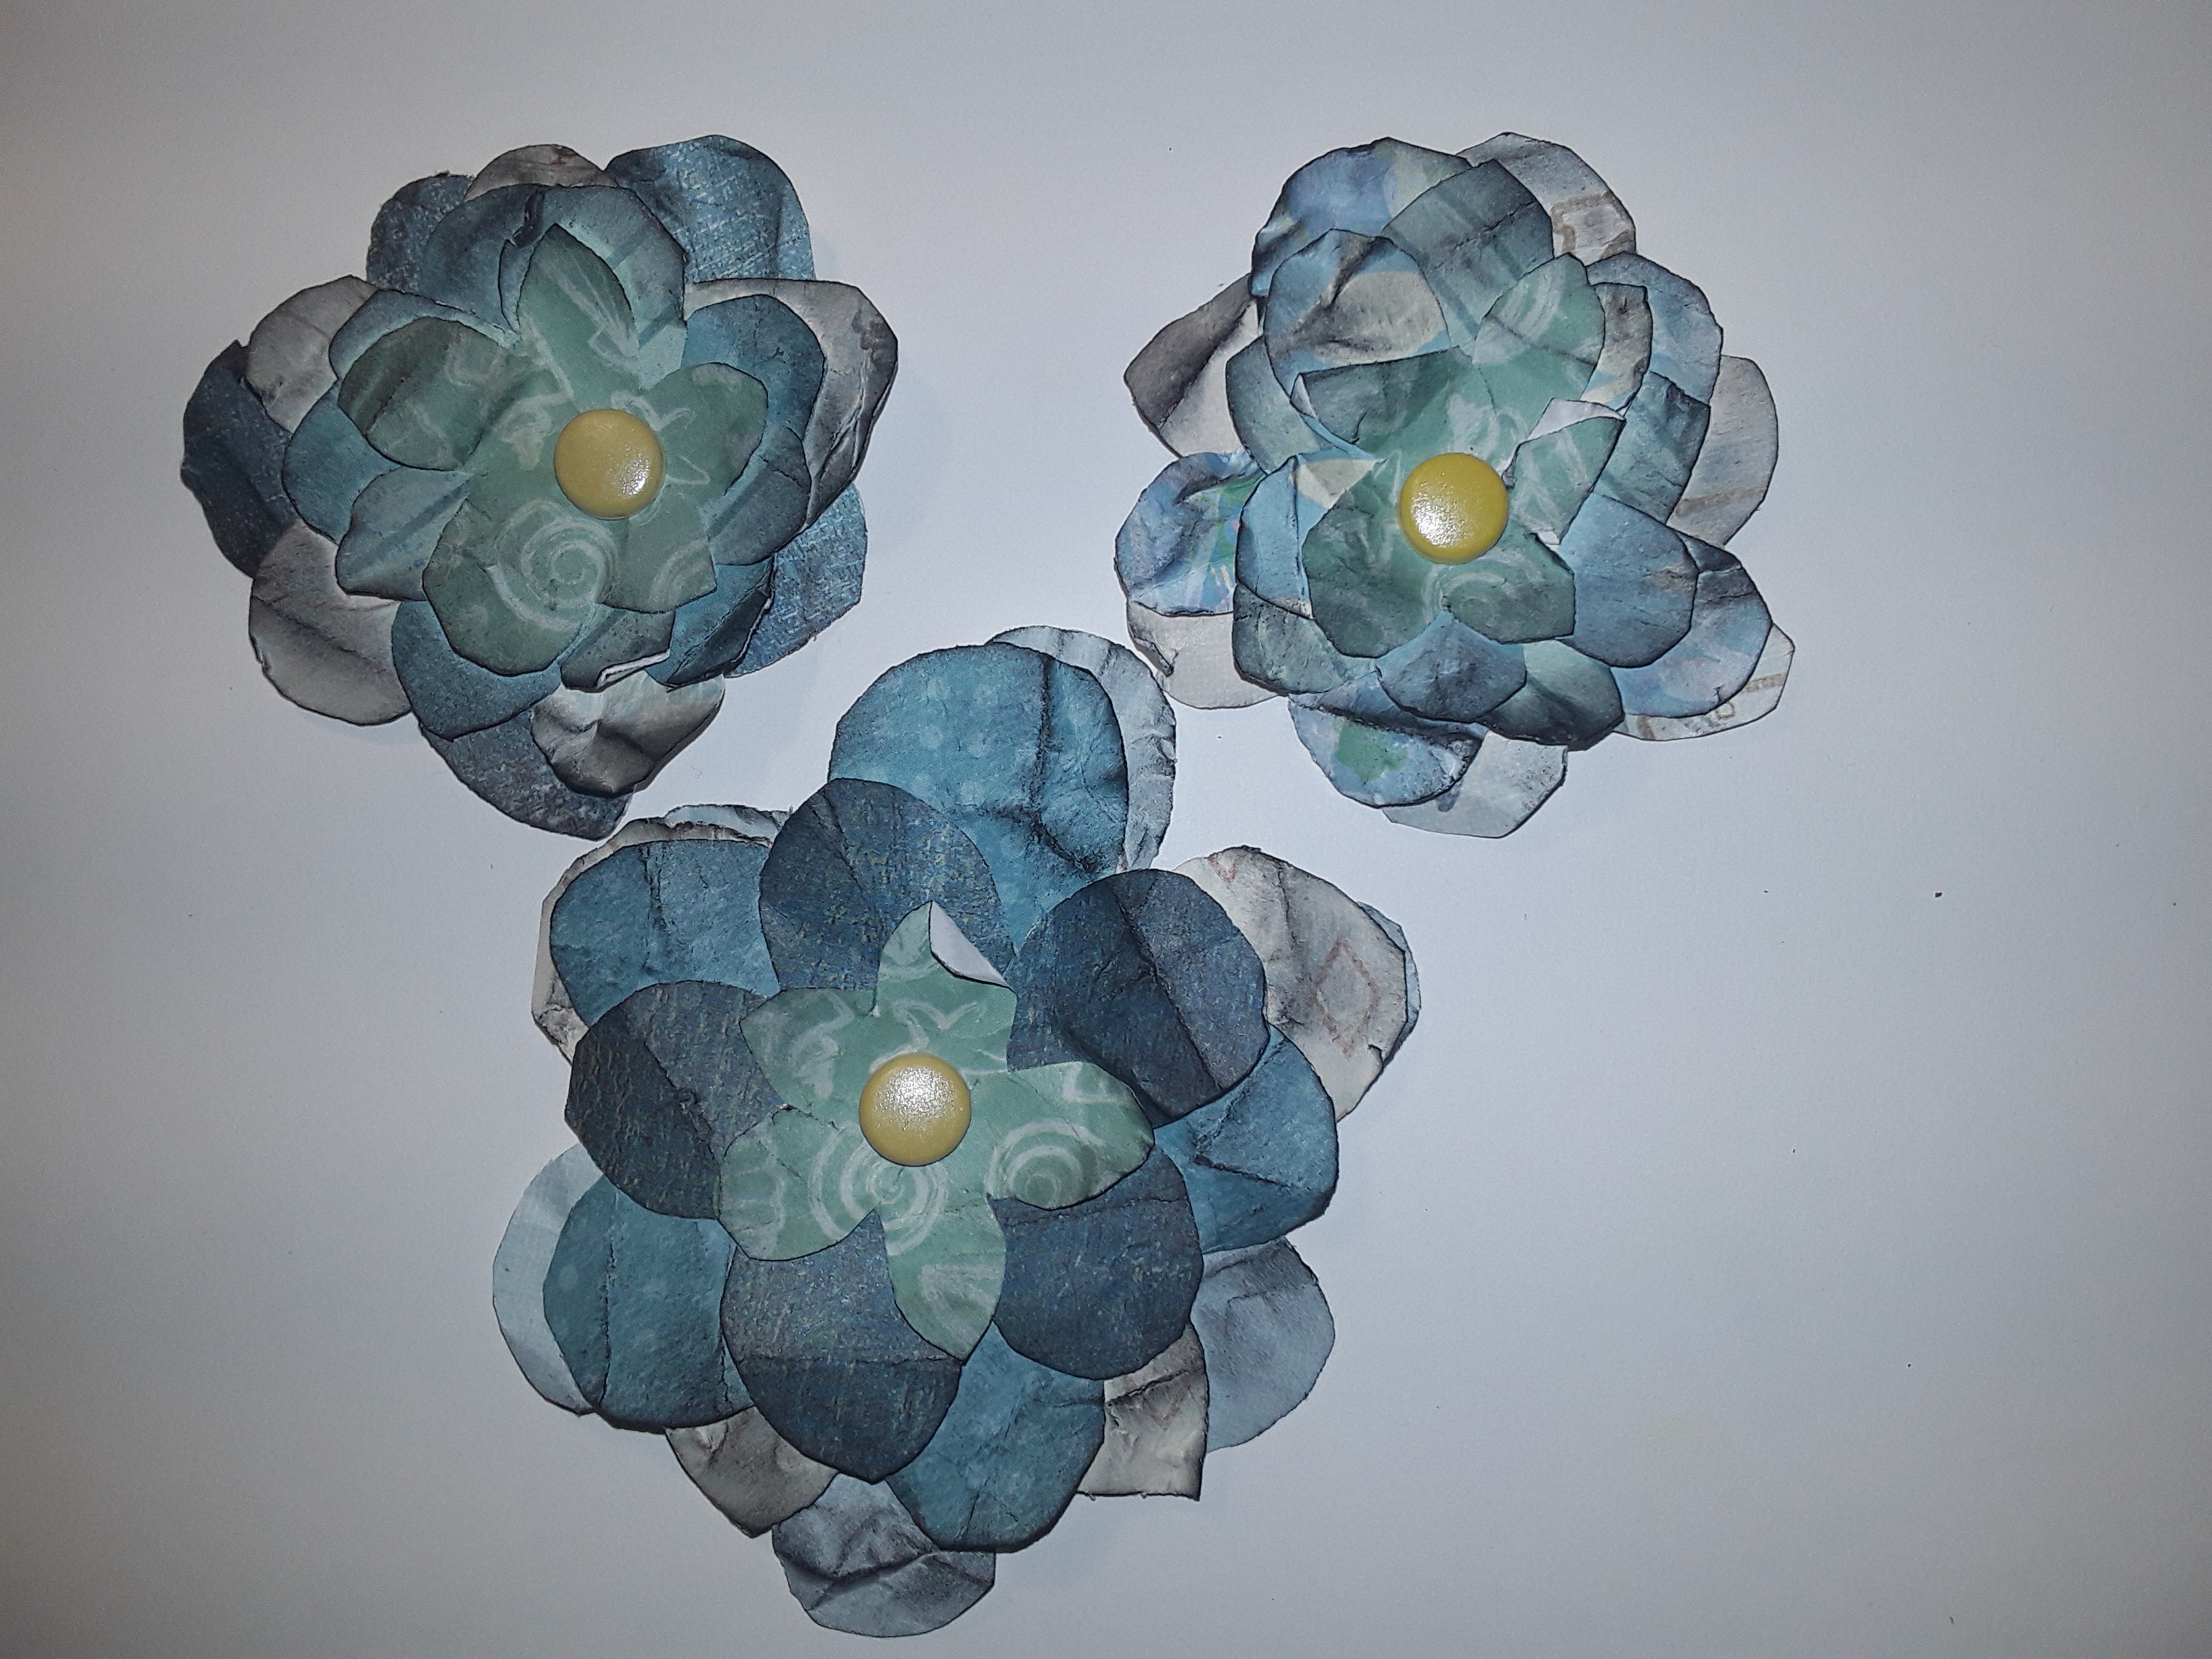 Hand-Cut Paper Flowers in Teal